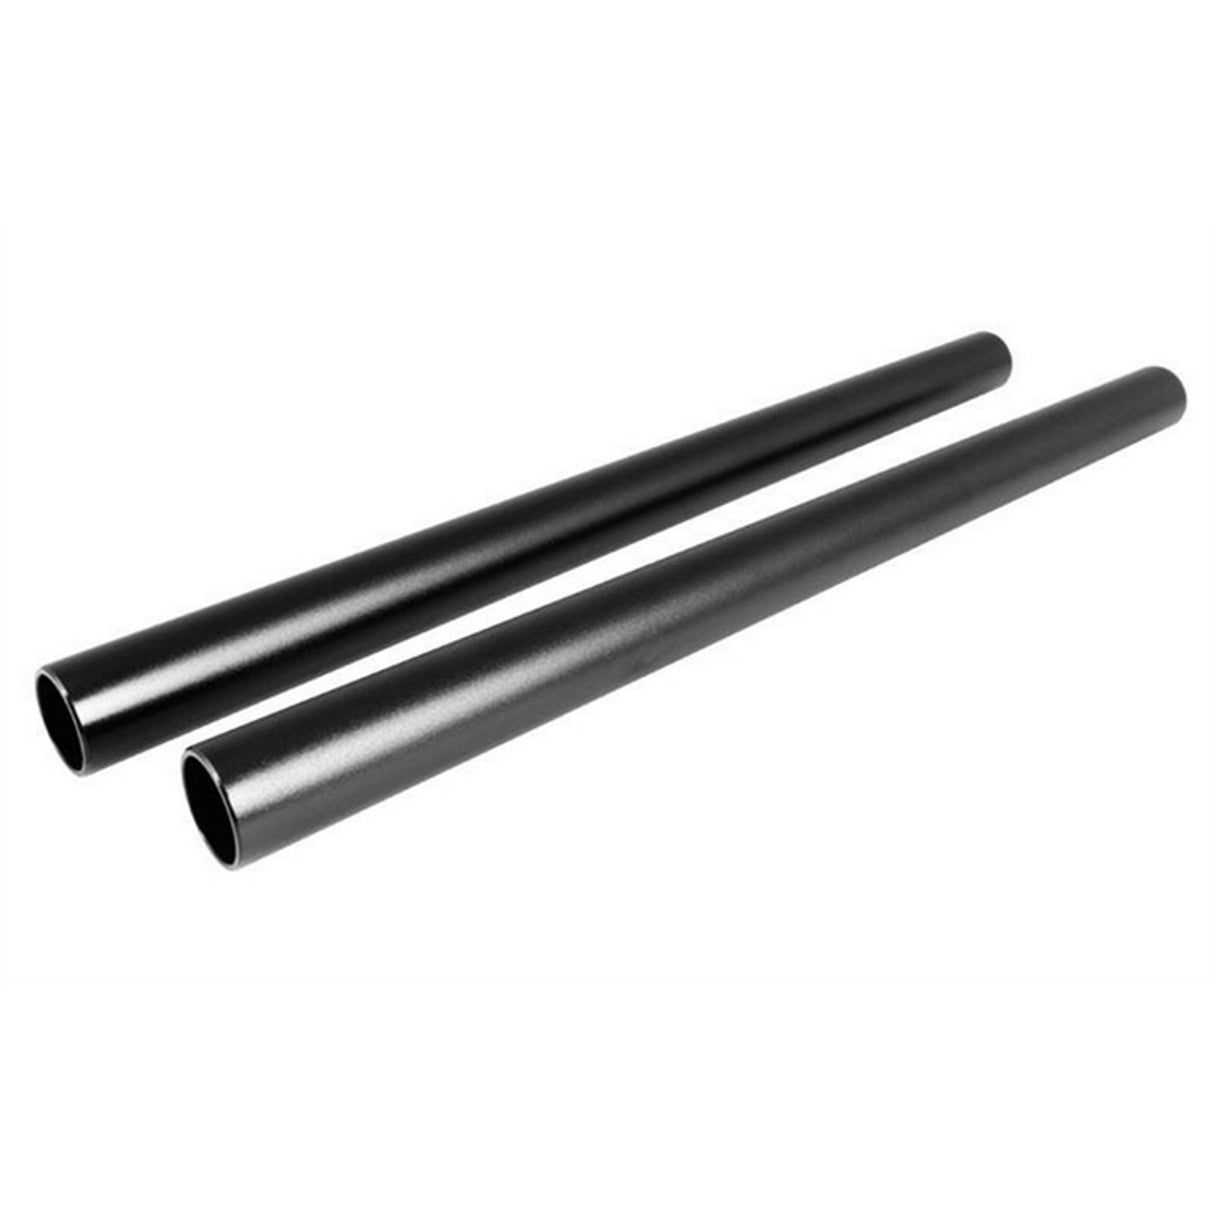 Genustech GMB-300 Support Bars, 300mm, Pair